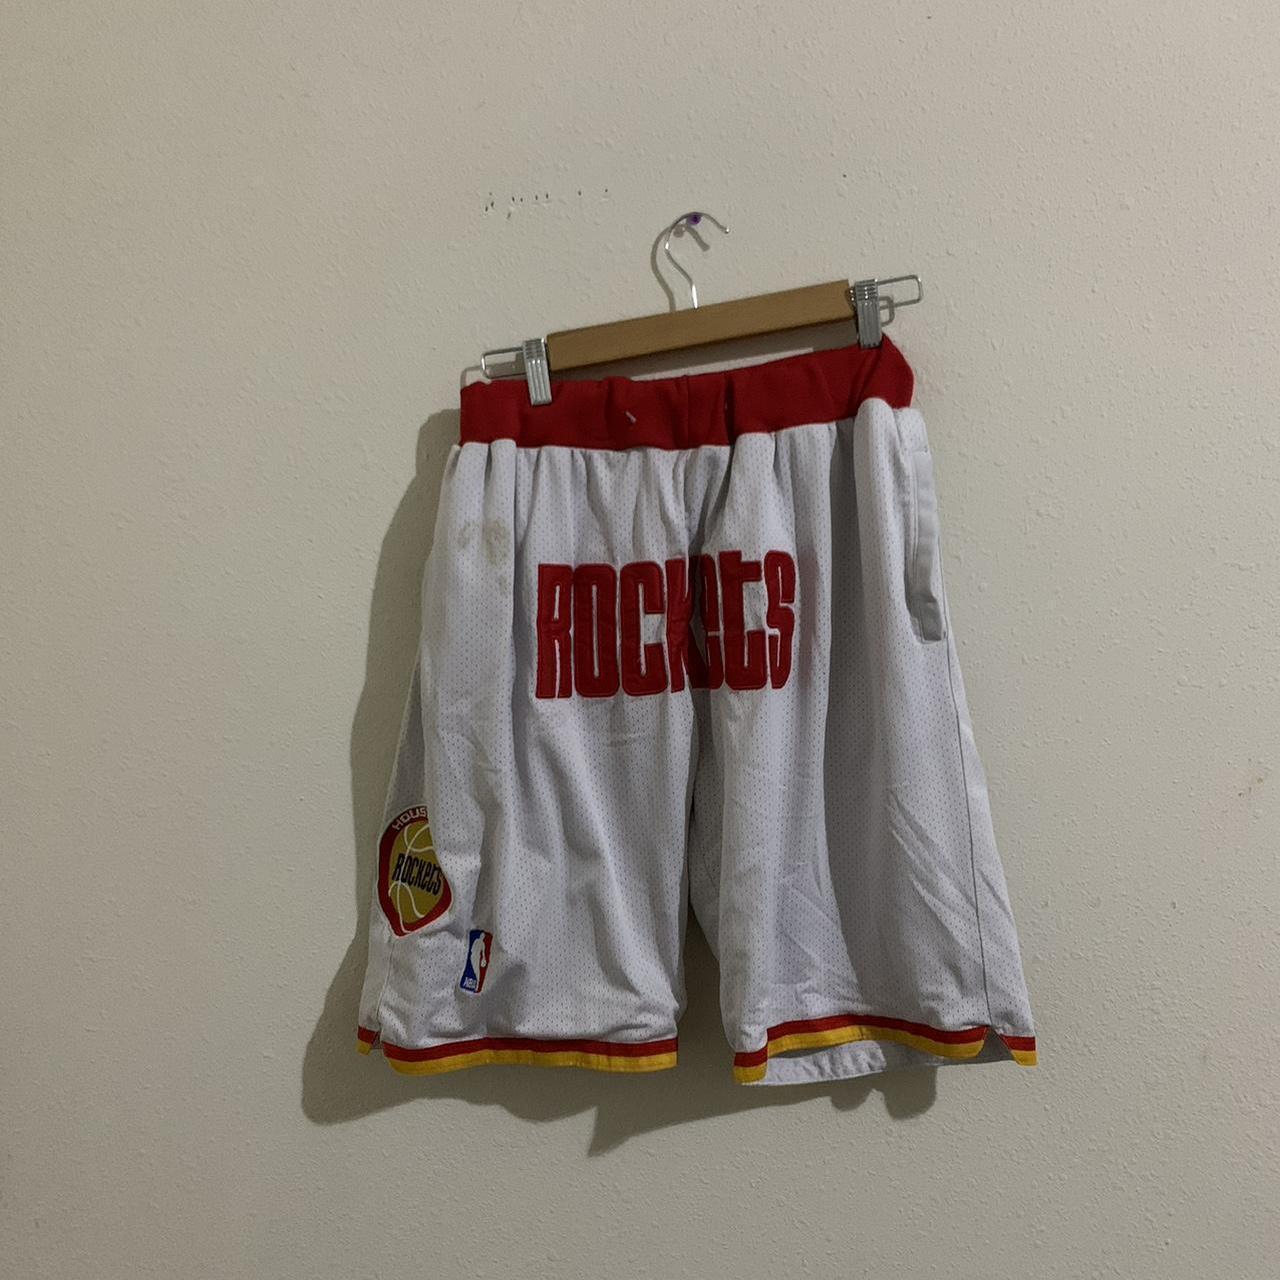 Vintage black white and red nba shorts with logo on - Depop